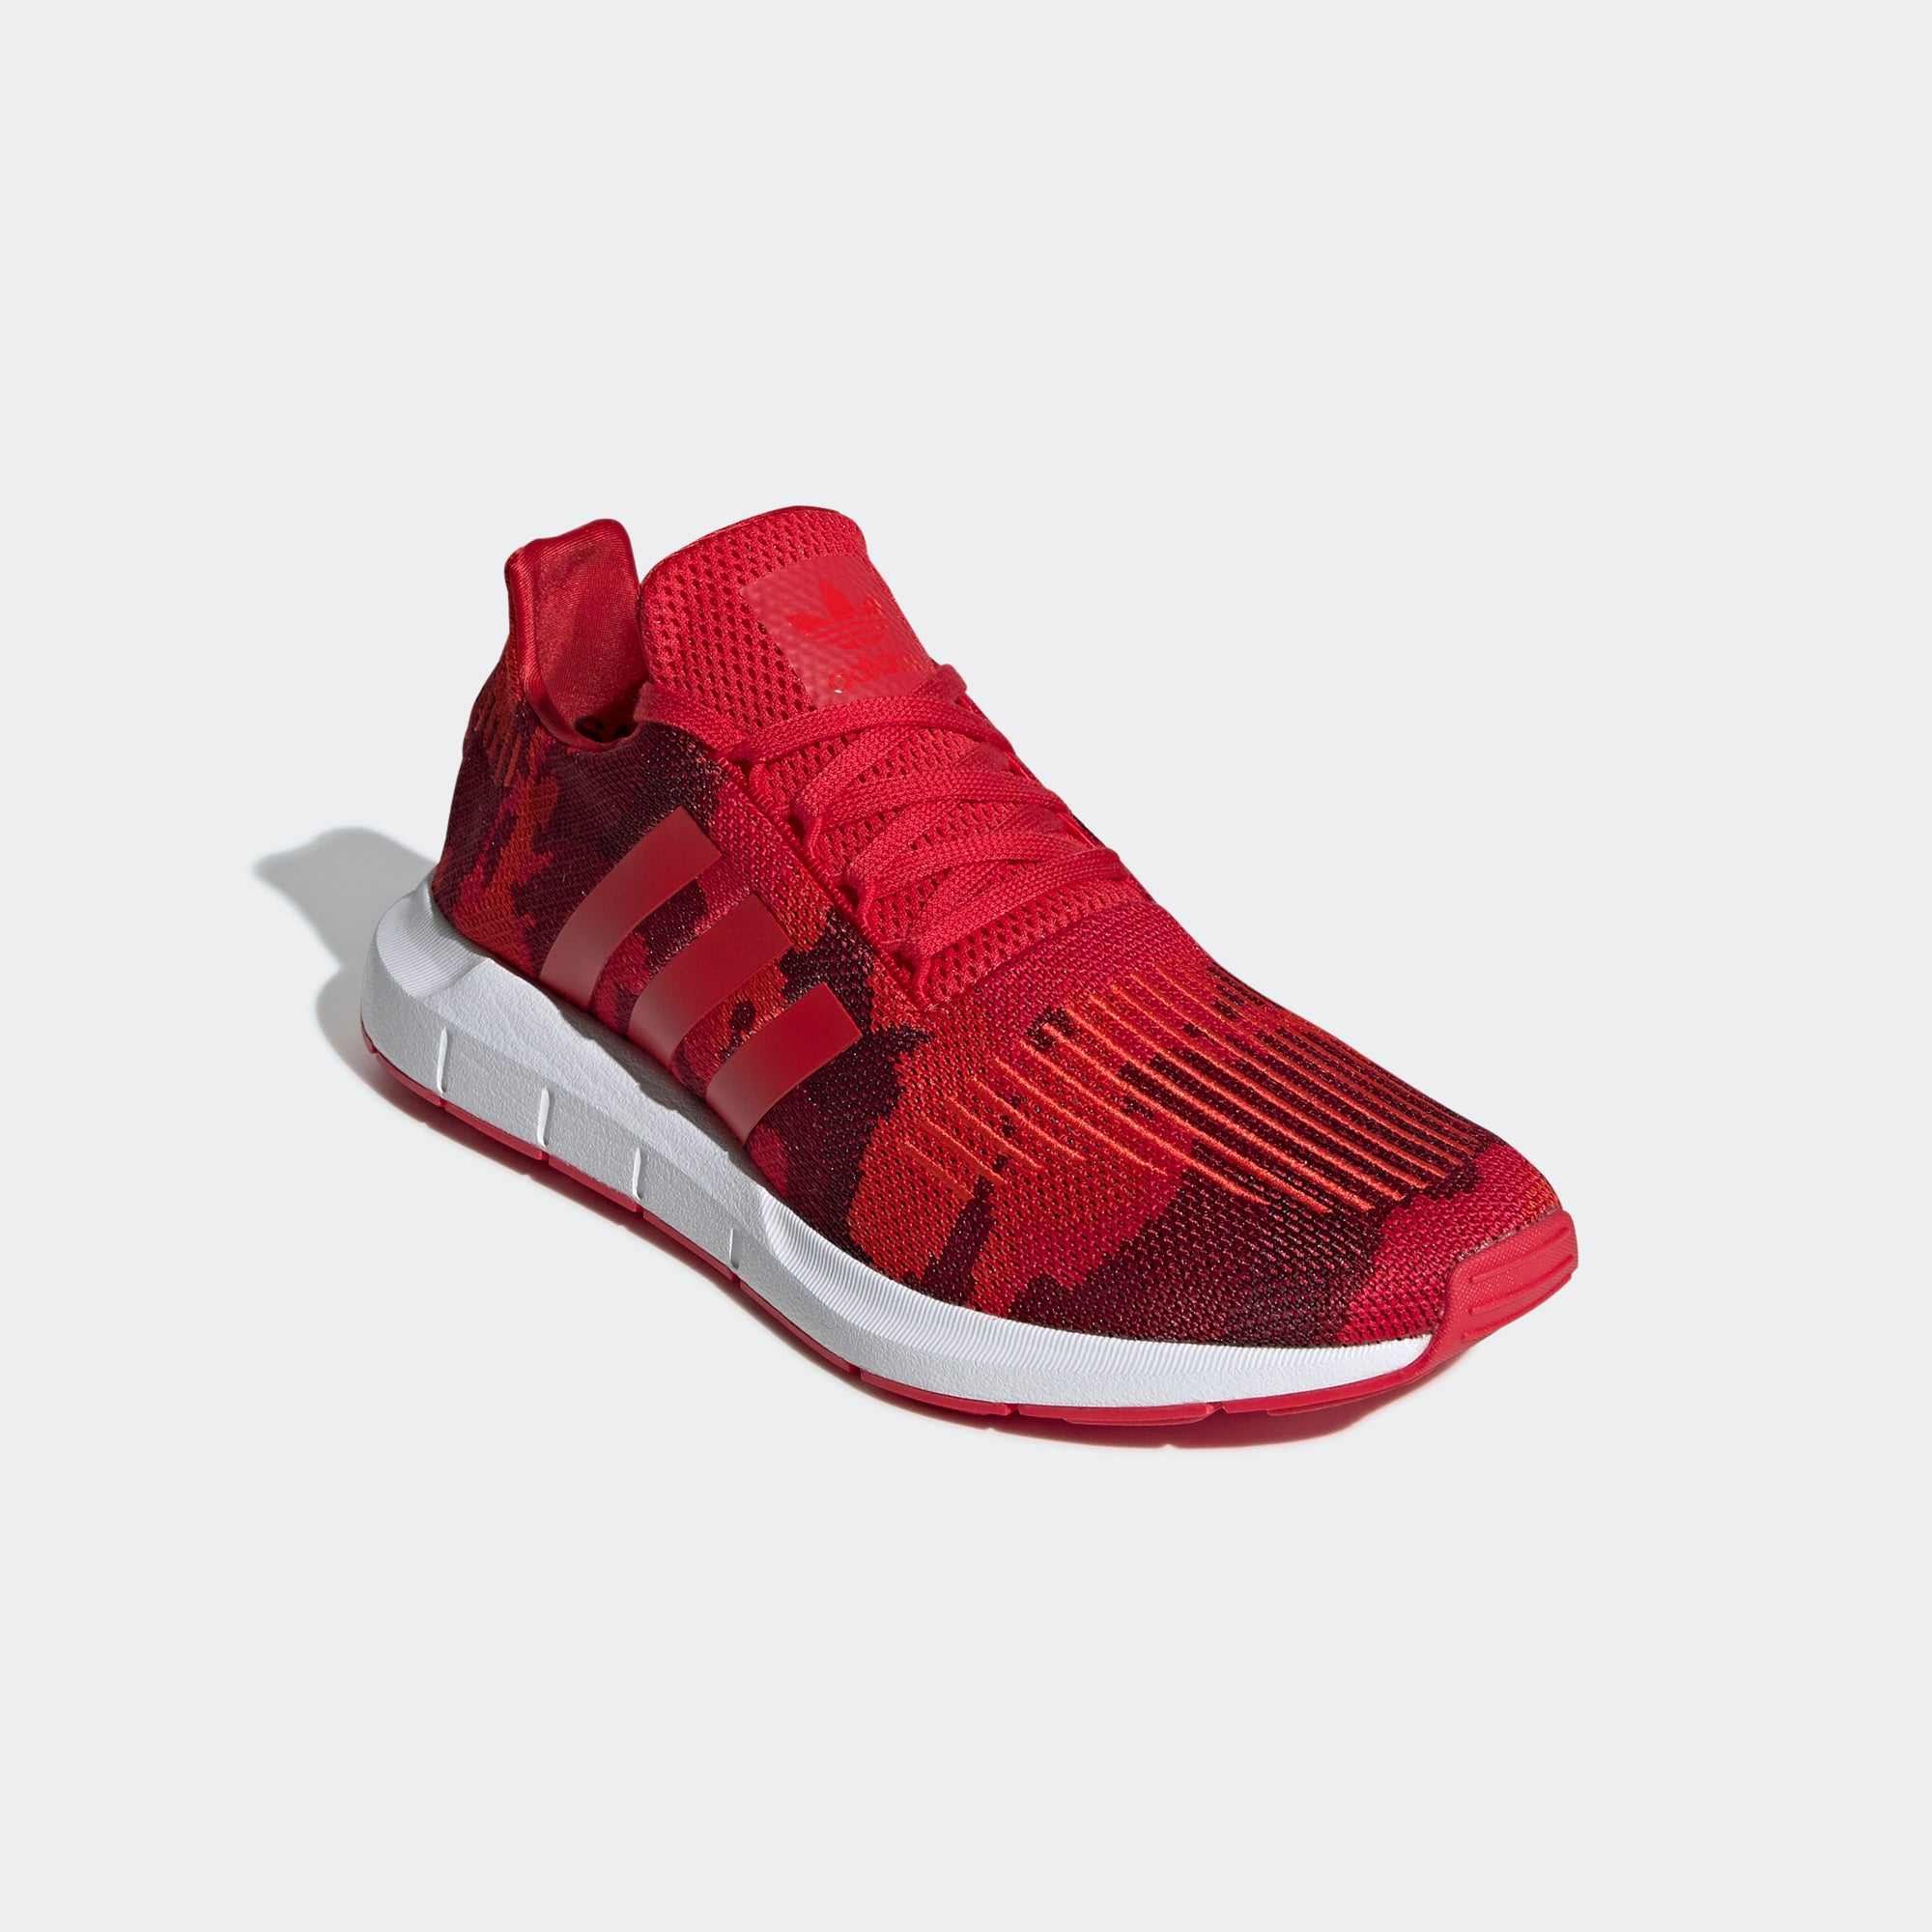 adidas swift run shoes red